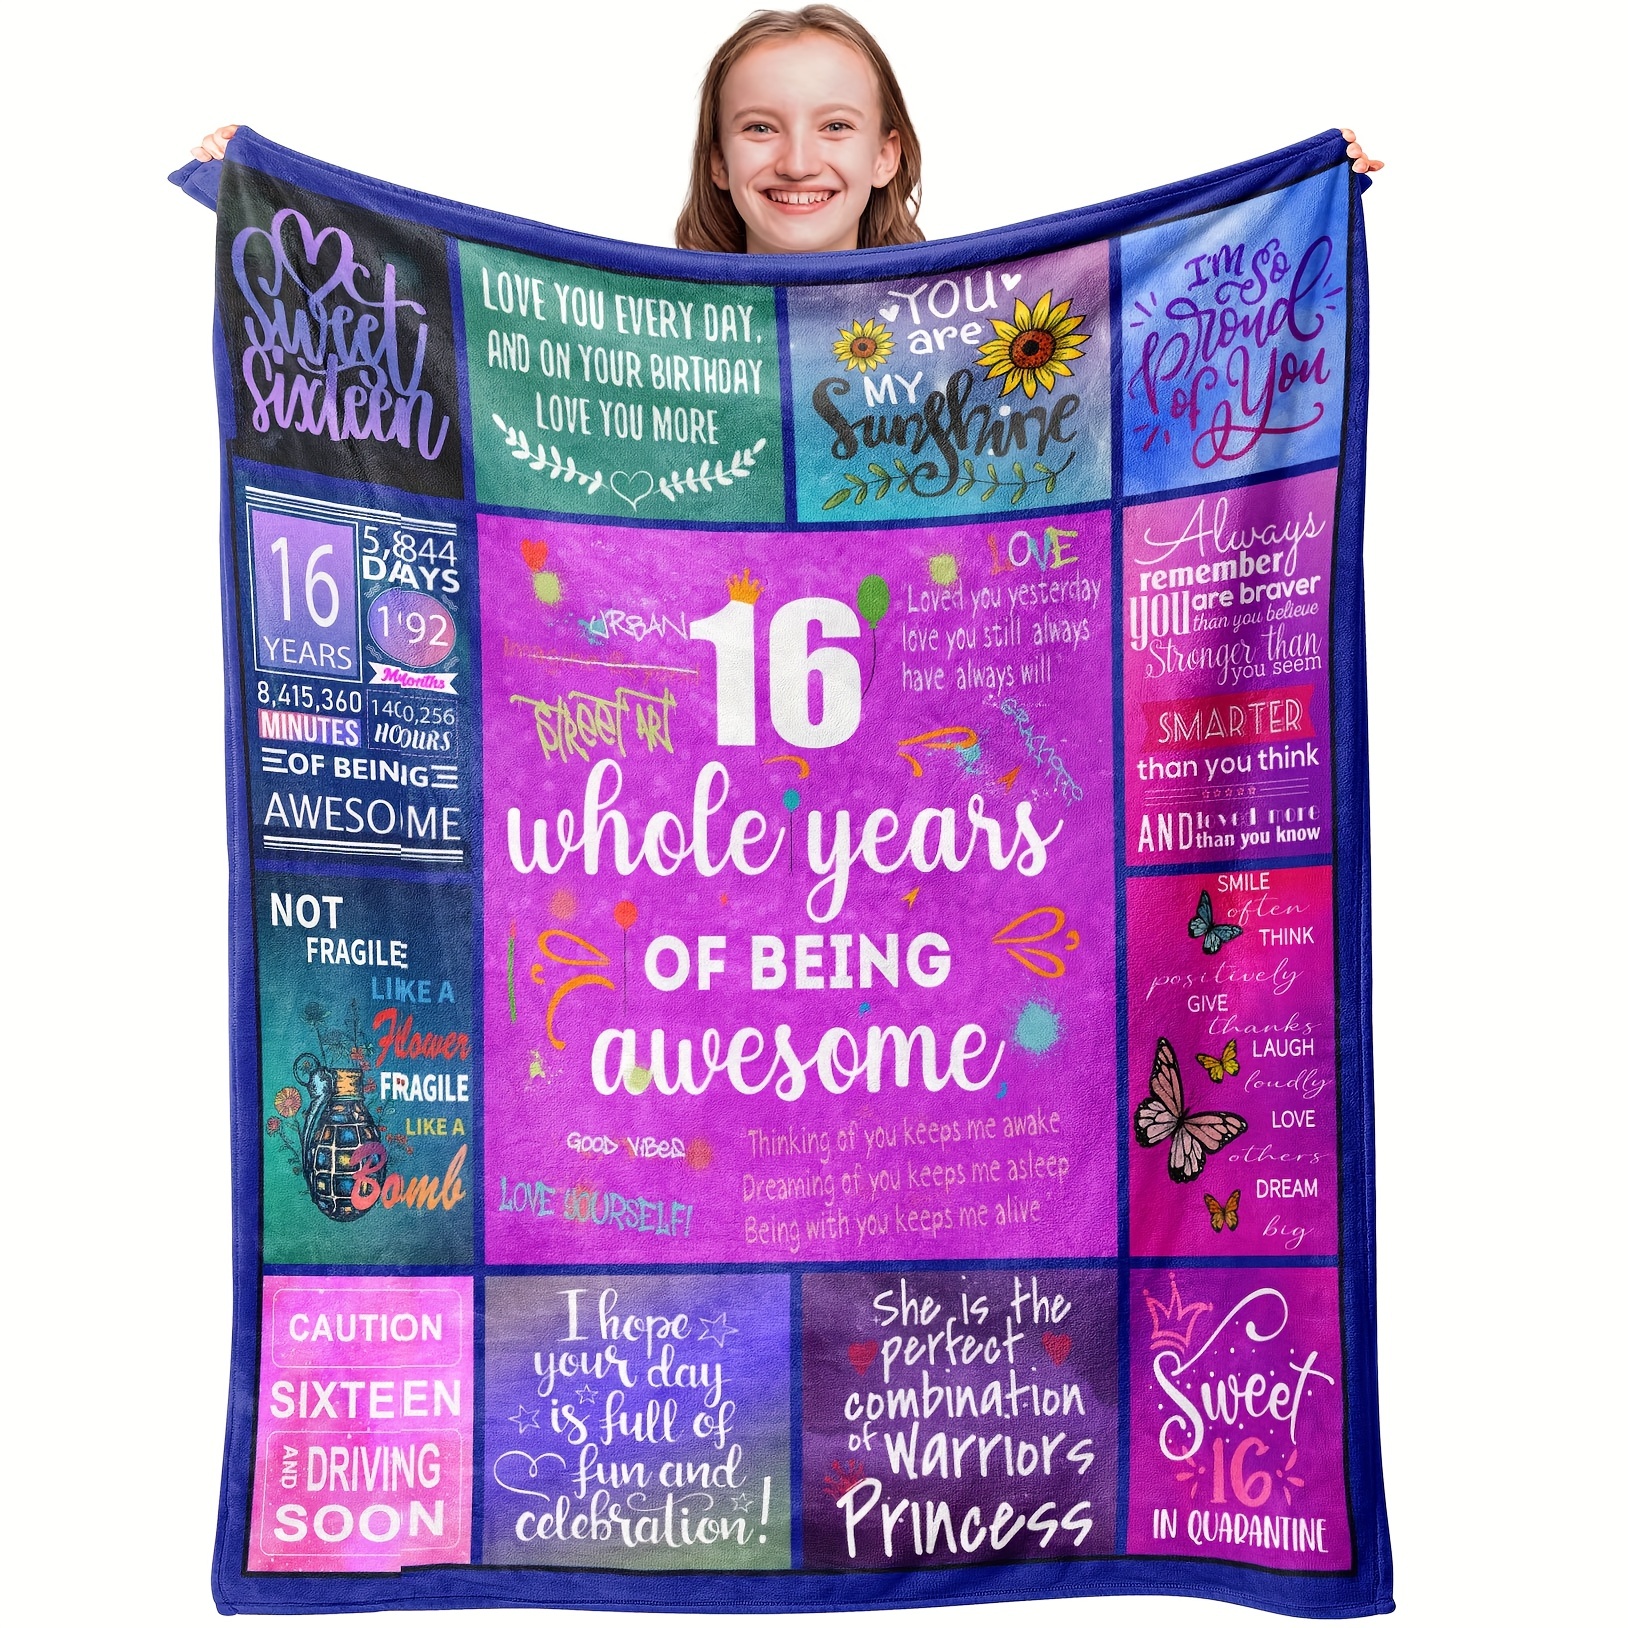  Gifts for 12 Year Old Girl Throw Pillow Covers 18x18 Inch, 12  Year Old Girl Gifts, 12 Year Old Girl Gift Ideas, Birthday Gifts for 12  Year Old Girls, 12th Birthday